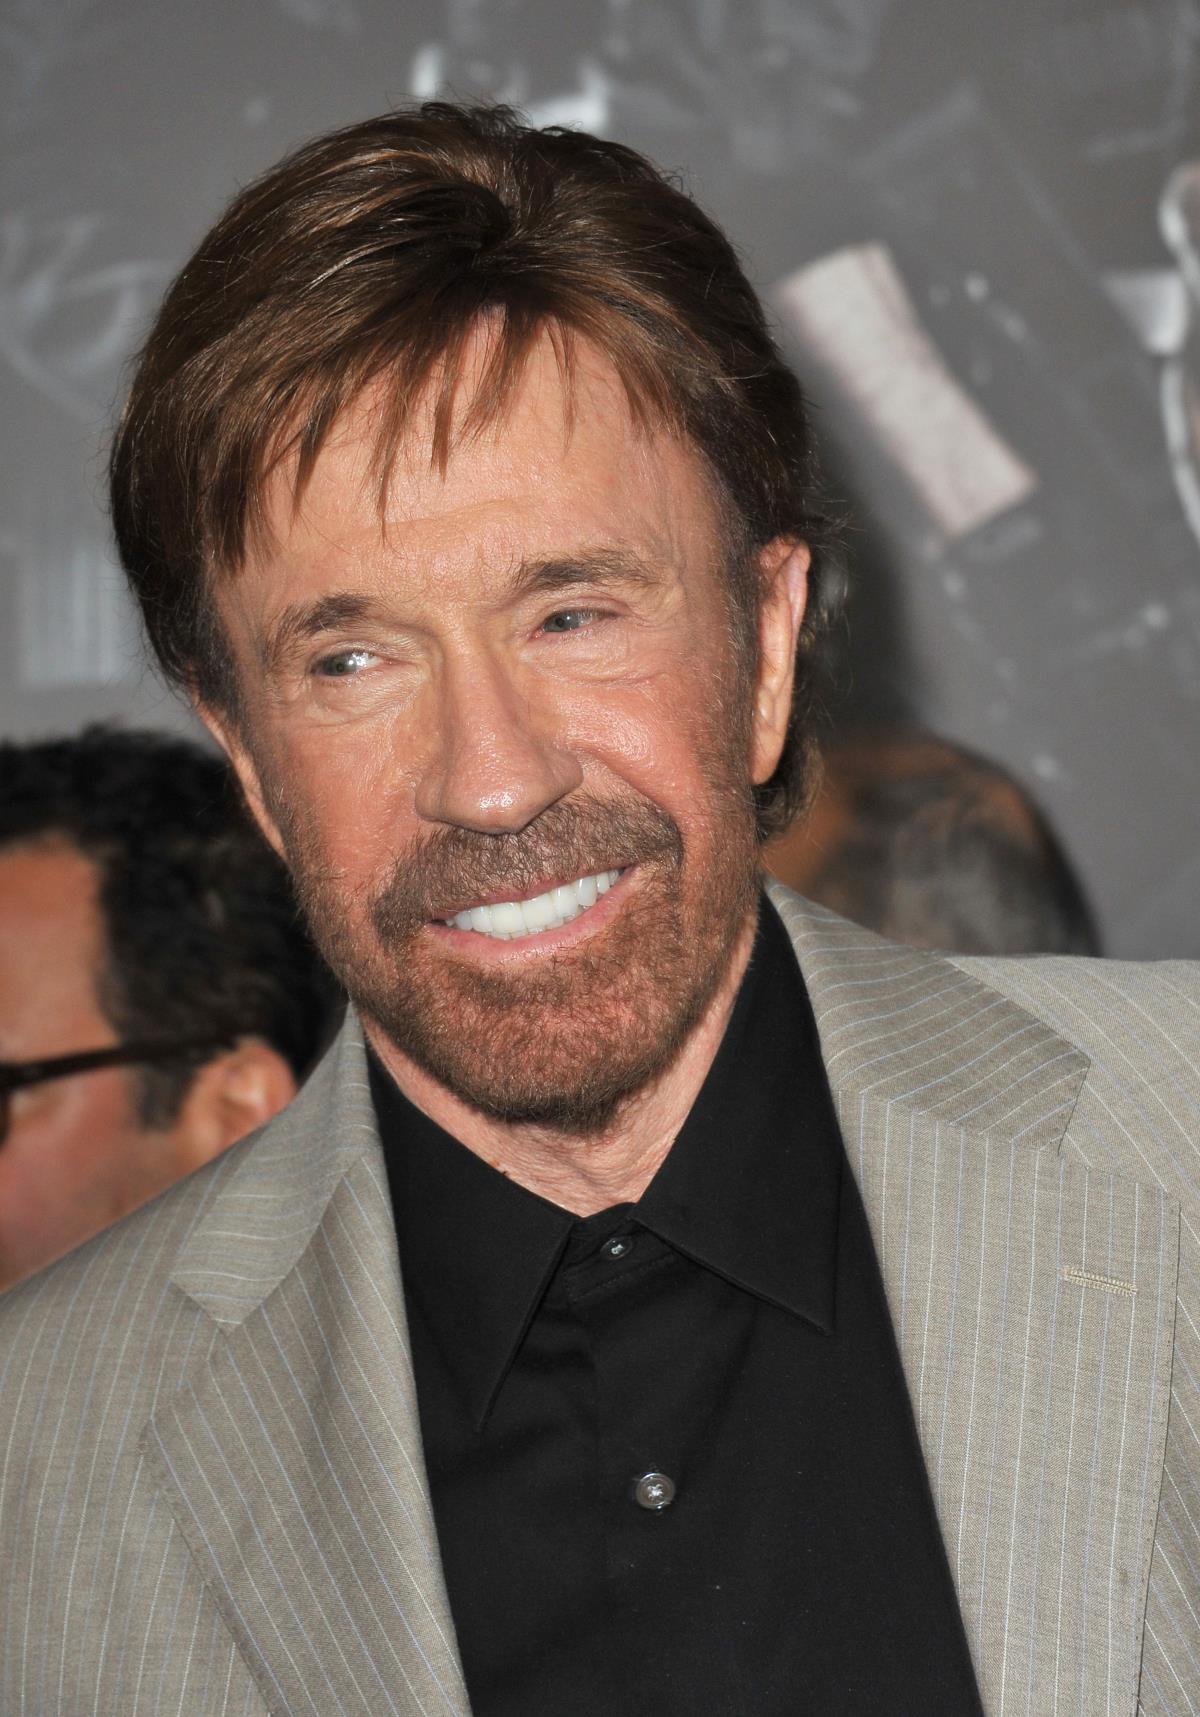 Mass awakening: Chuck Norris and other celebrities are speaking about chemtrails